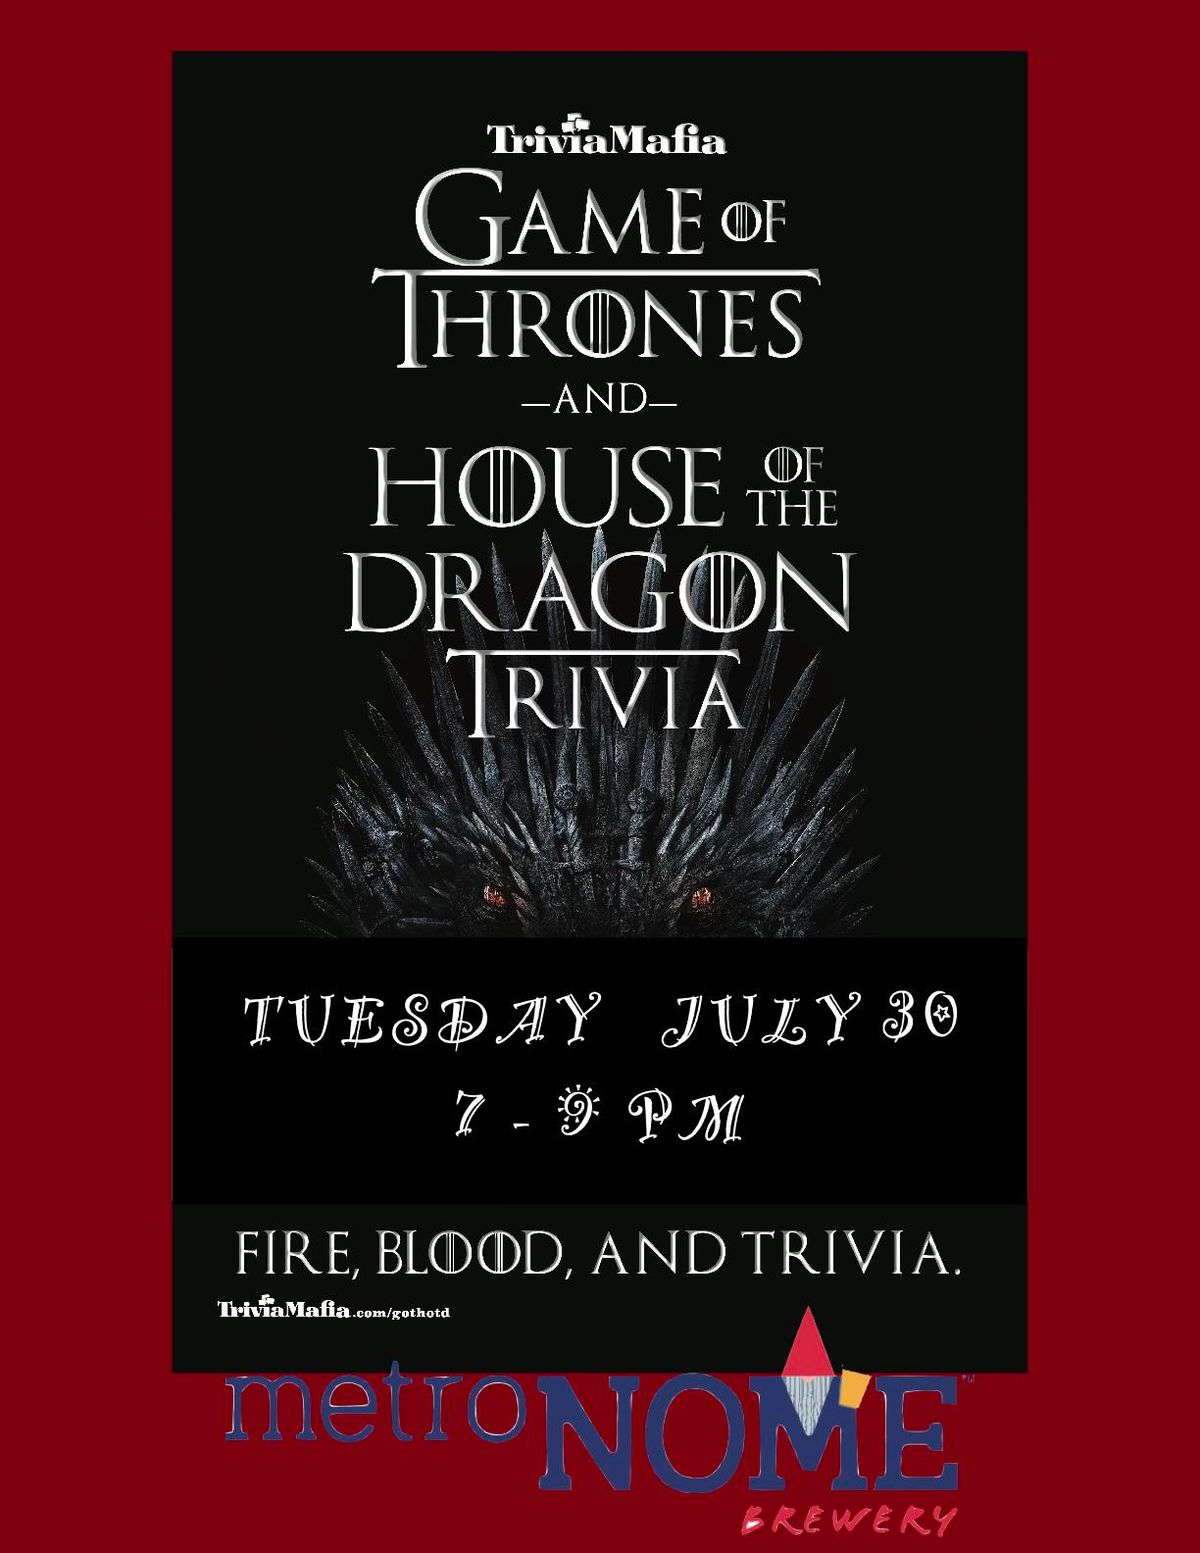 Game of Thrones and House of the Dragon Trivia